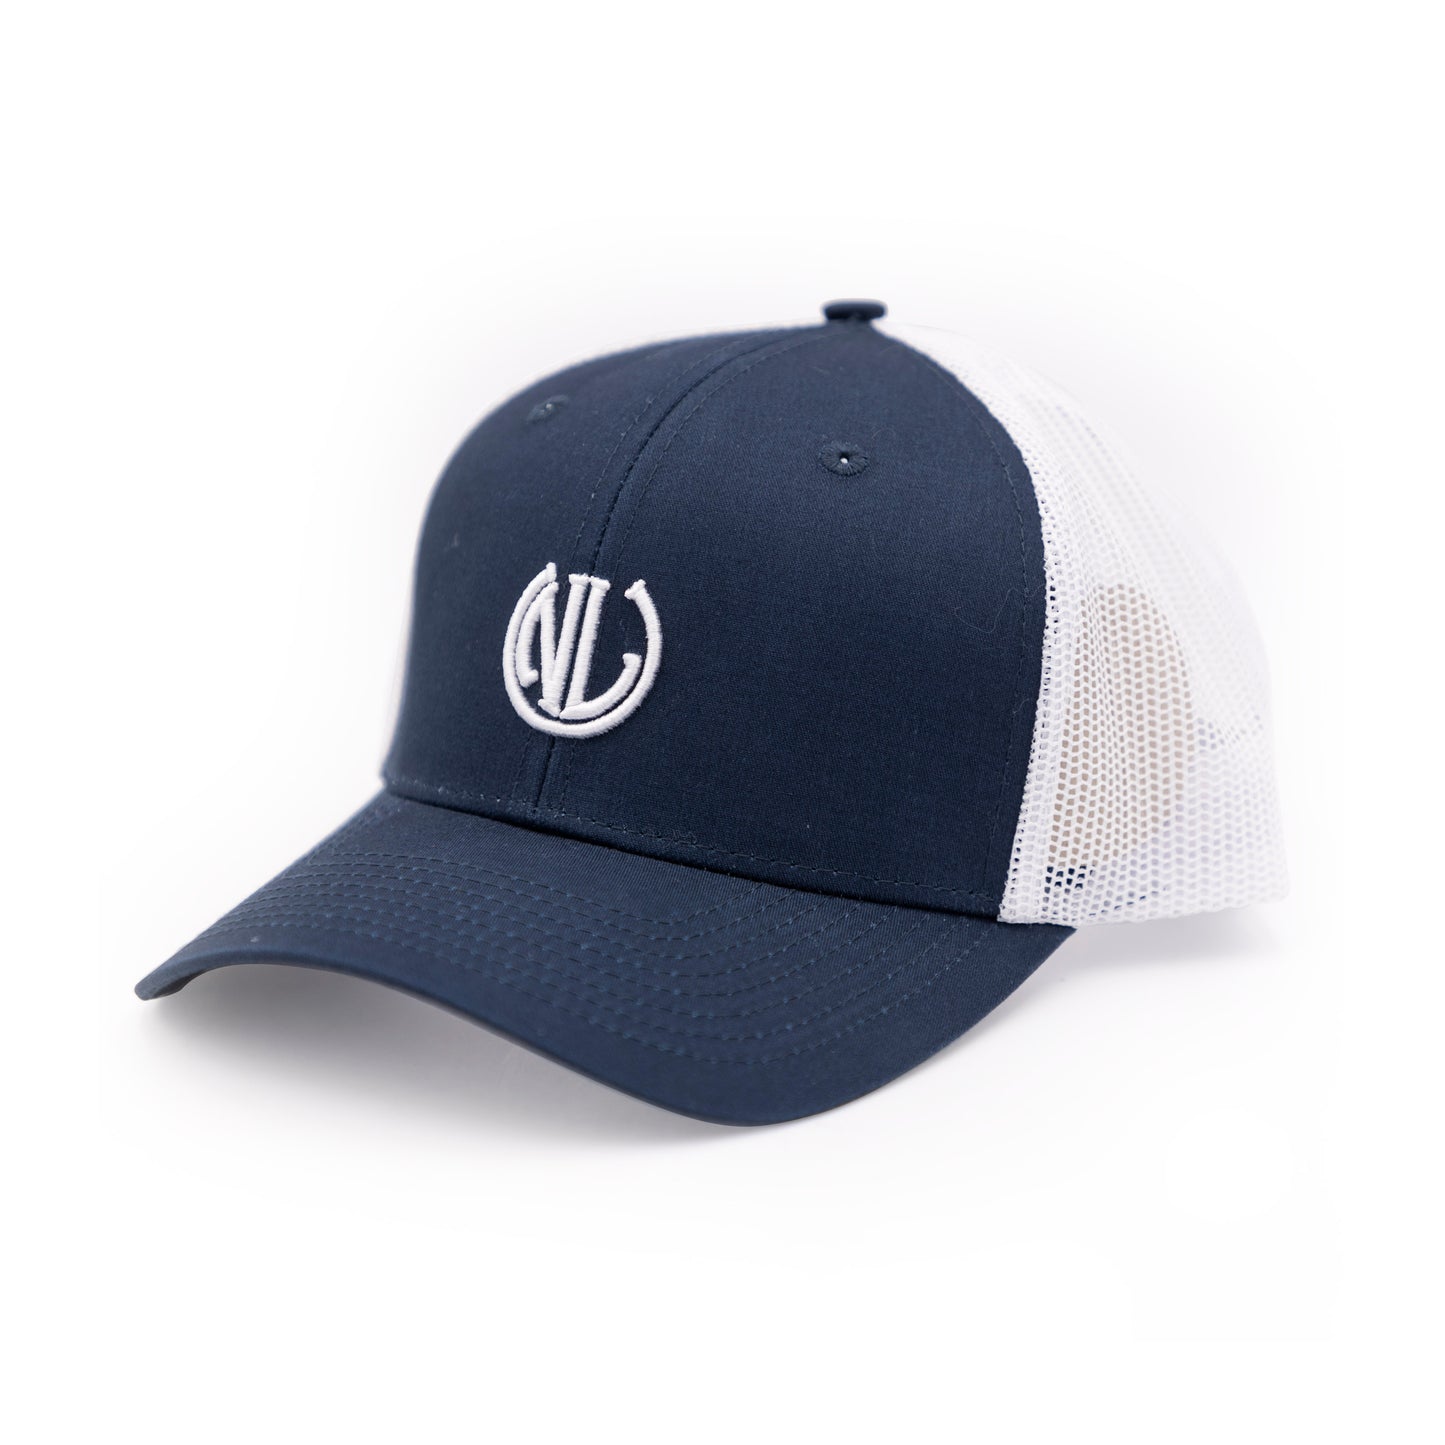 NLU Airline High Crown Trucker Hat | Navy w/ White Mesh & Red, White, Blue Patch